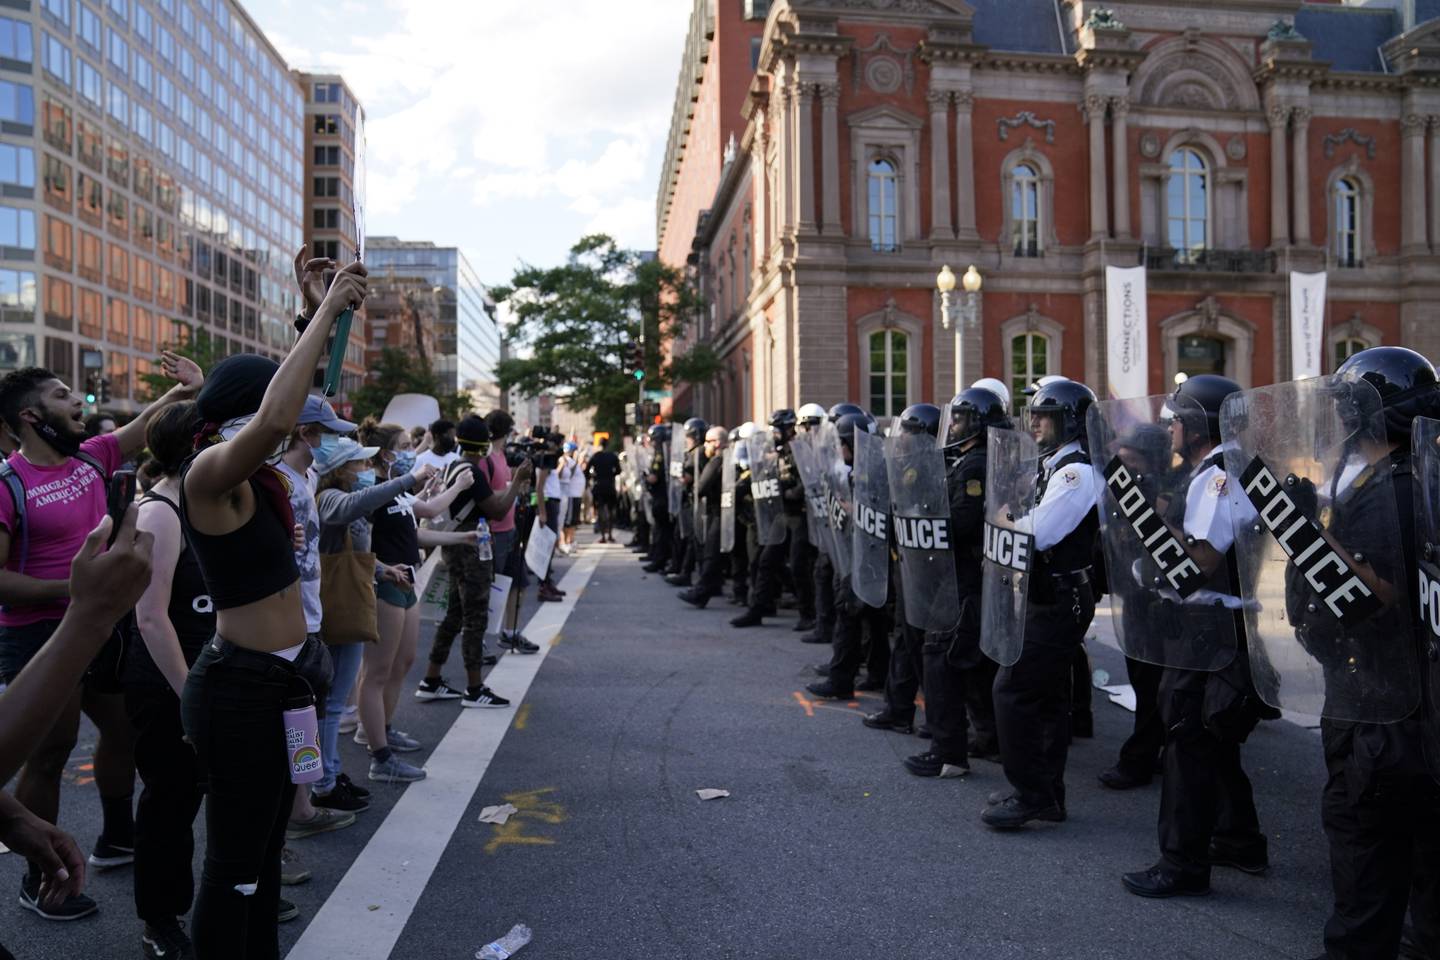 Demonstrators vent to police in riot gear as they protest the death of George Floyd, Saturday, May 30, 2020, near the White House in Washington. Floyd died after being restrained by Minneapolis police officers.